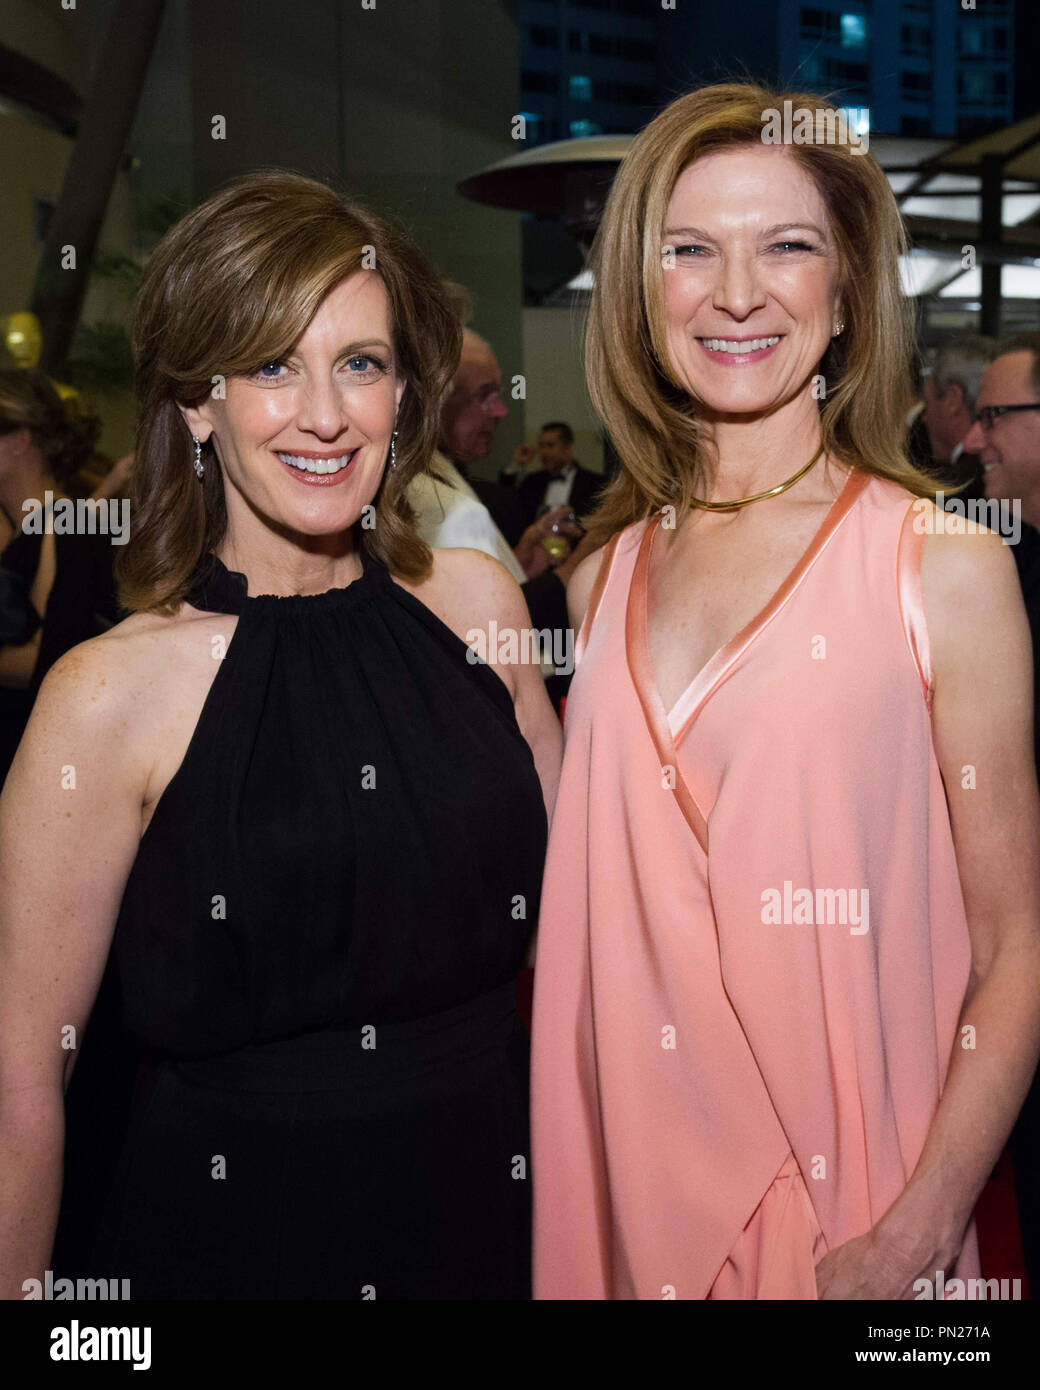 Anne Marie Sweeney (left) and Dawn Hudson attend the 6th Annual Governors Awards in The Ray Dolby Ballroom at Hollywood & Highland Center® in Hollywood, CA, on Saturday, November 8, 2014.  File Reference # 32487 021THA  For Editorial Use Only -  All Rights Reserved Stock Photo